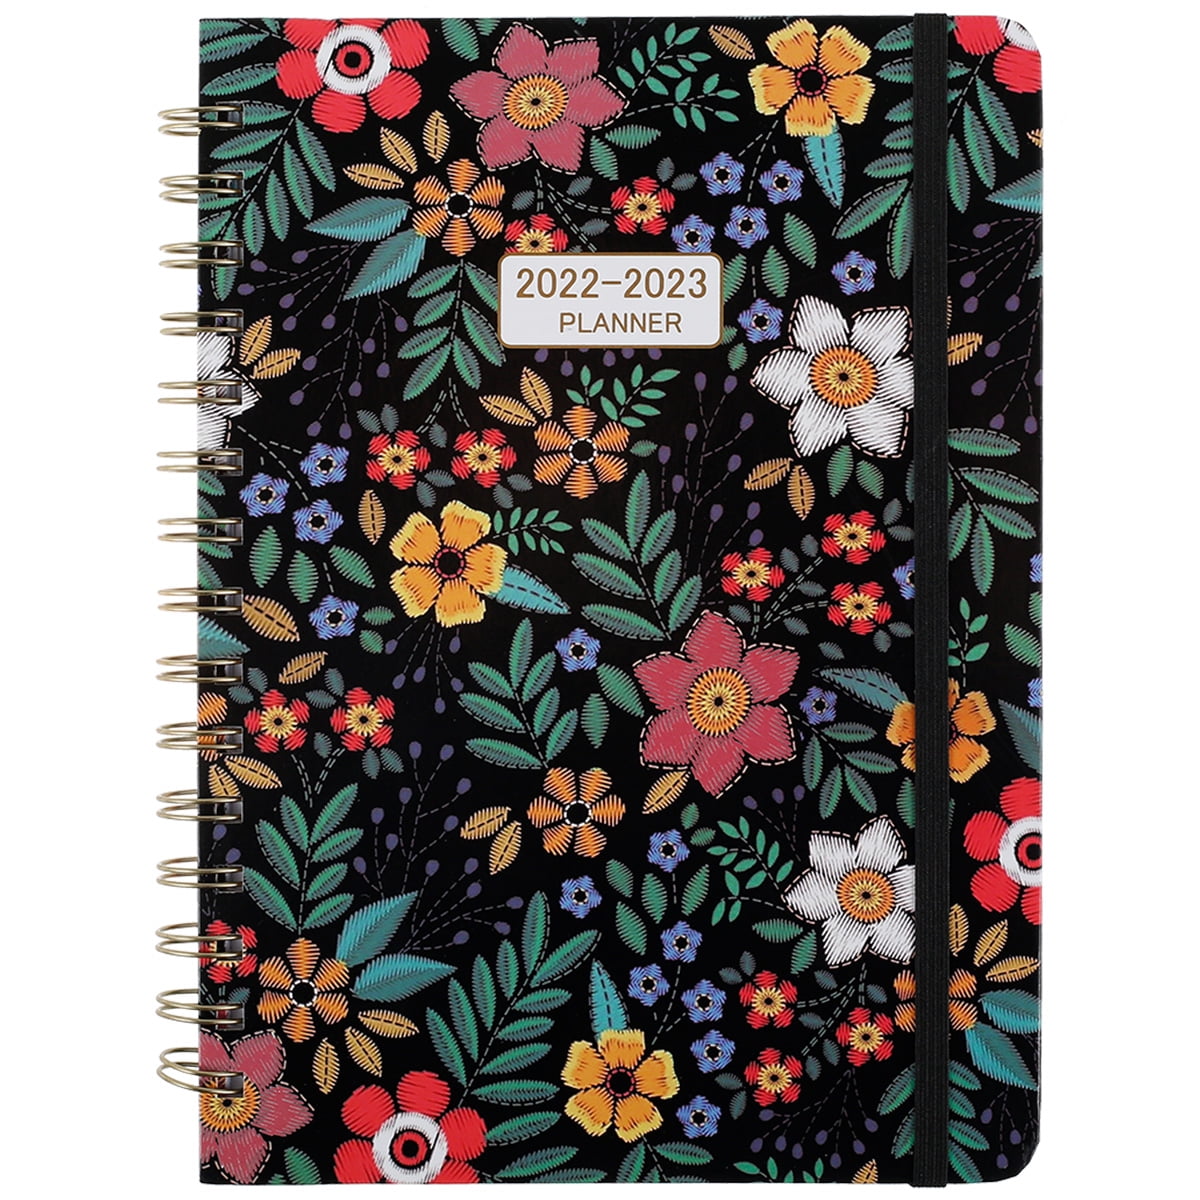 8 x 10 December 2022 2022 Planner Beautiful Flowers January 2022 Planner Weekly and Monthly with Twin-Wire Binding Planner 2022 with Flexible Cover 